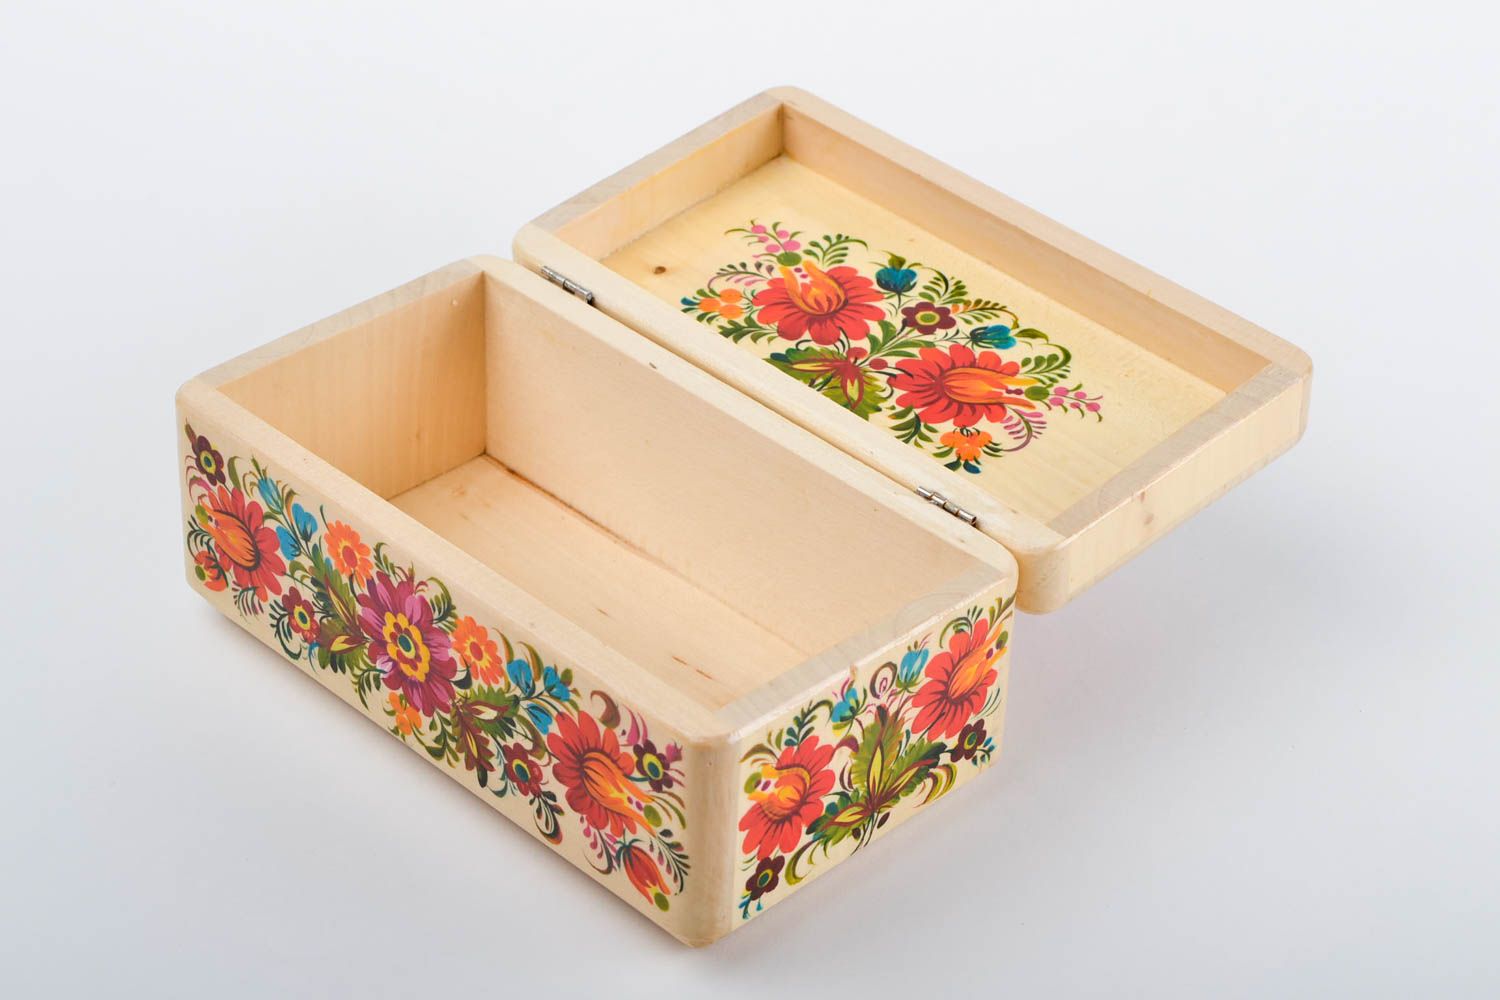 Homemade decorations wood jewelry box wooden box women accessories home decor photo 4